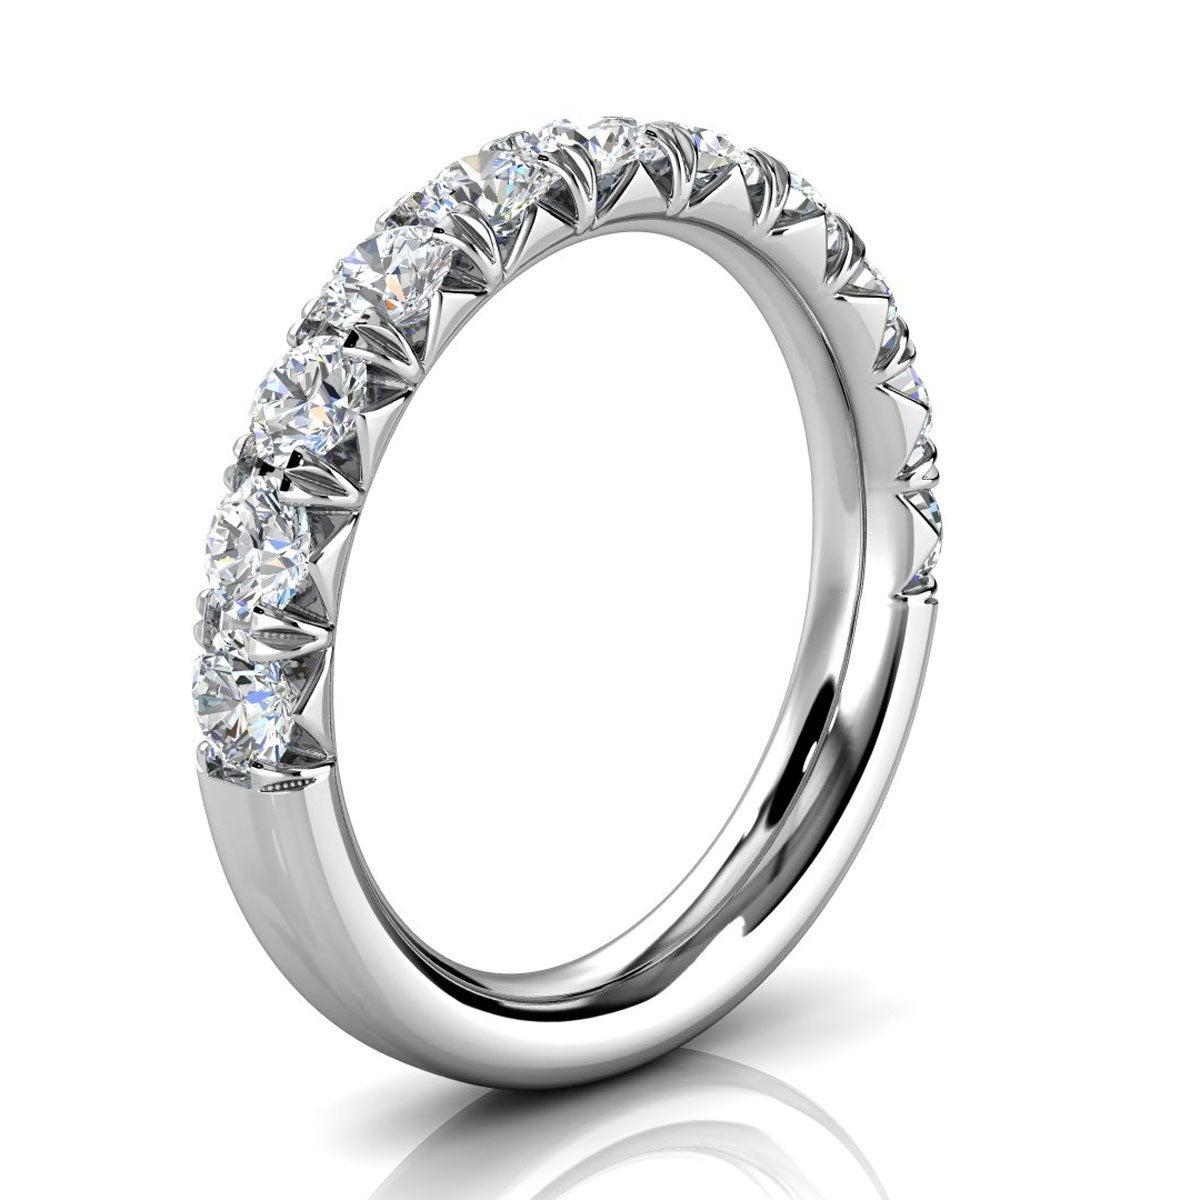 For Sale:  18k White Gold Voyage French Pave Diamond Ring '1 Ct. Tw' 2